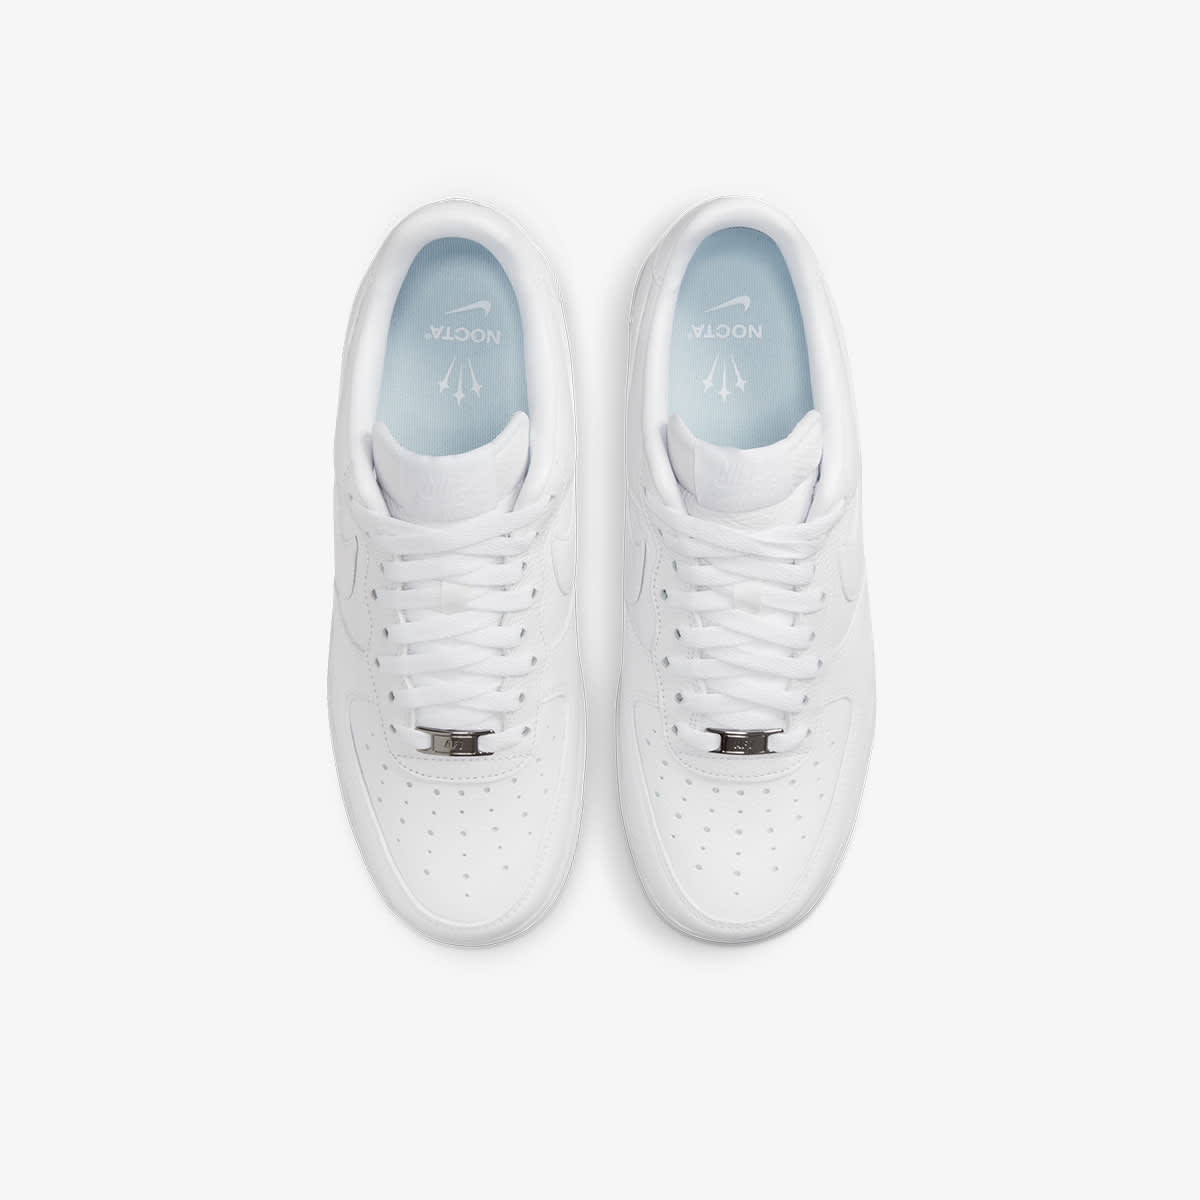 Nike X Nocta Air Force 1 Low Sp (White & Colbalt) | END. Launches